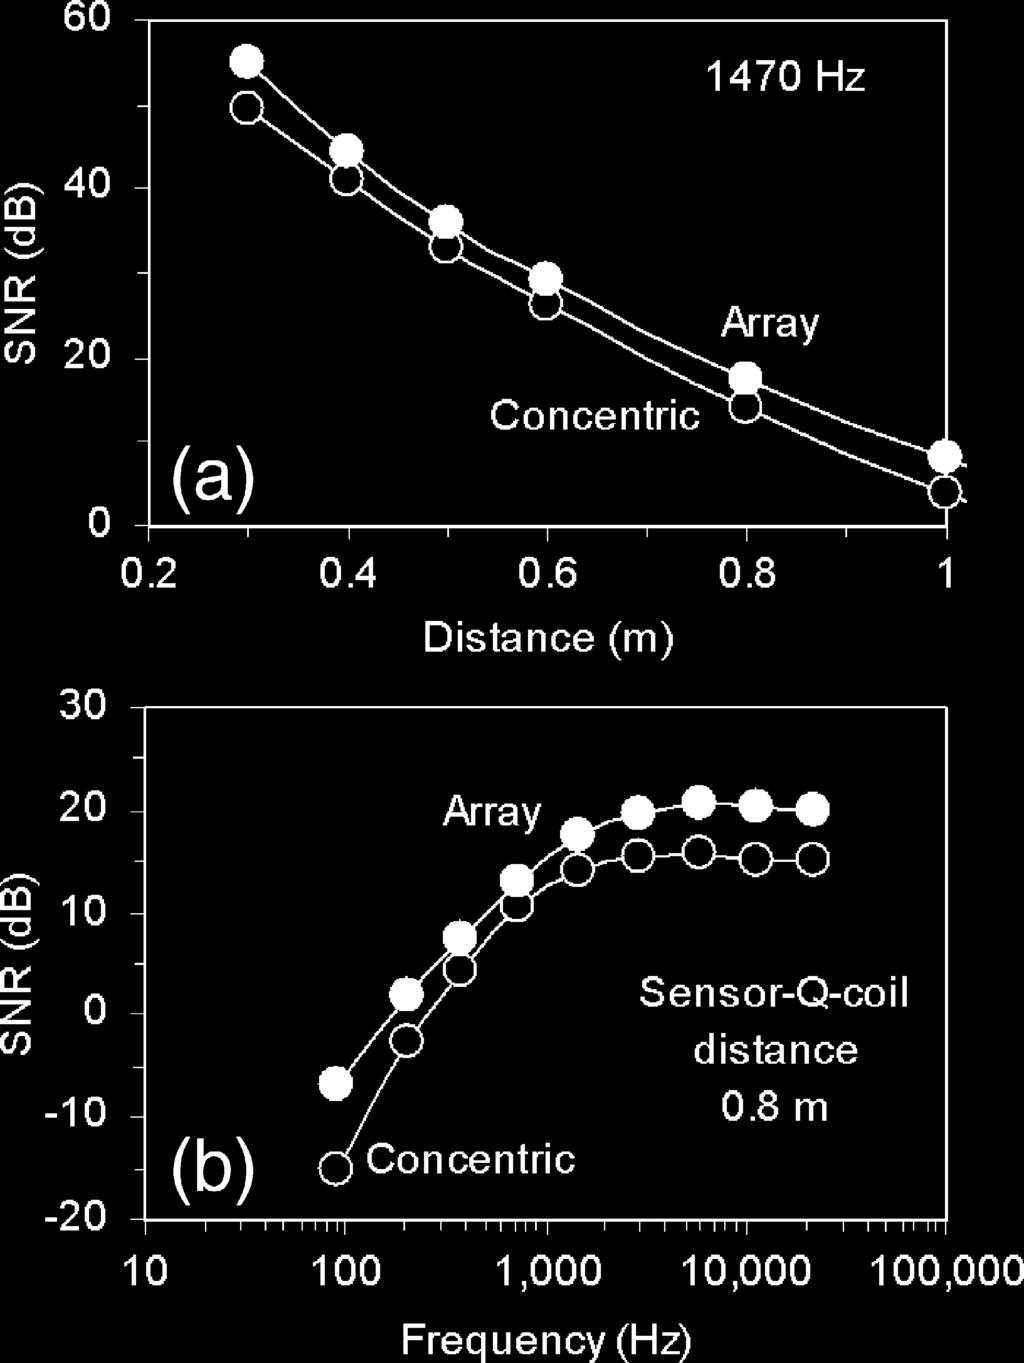 and sferics can be largely canceled out by the array coil configuration. We carried out tests against a manmade EM noise at the operating frequencies of the array and concentric coil sensor. Fig.